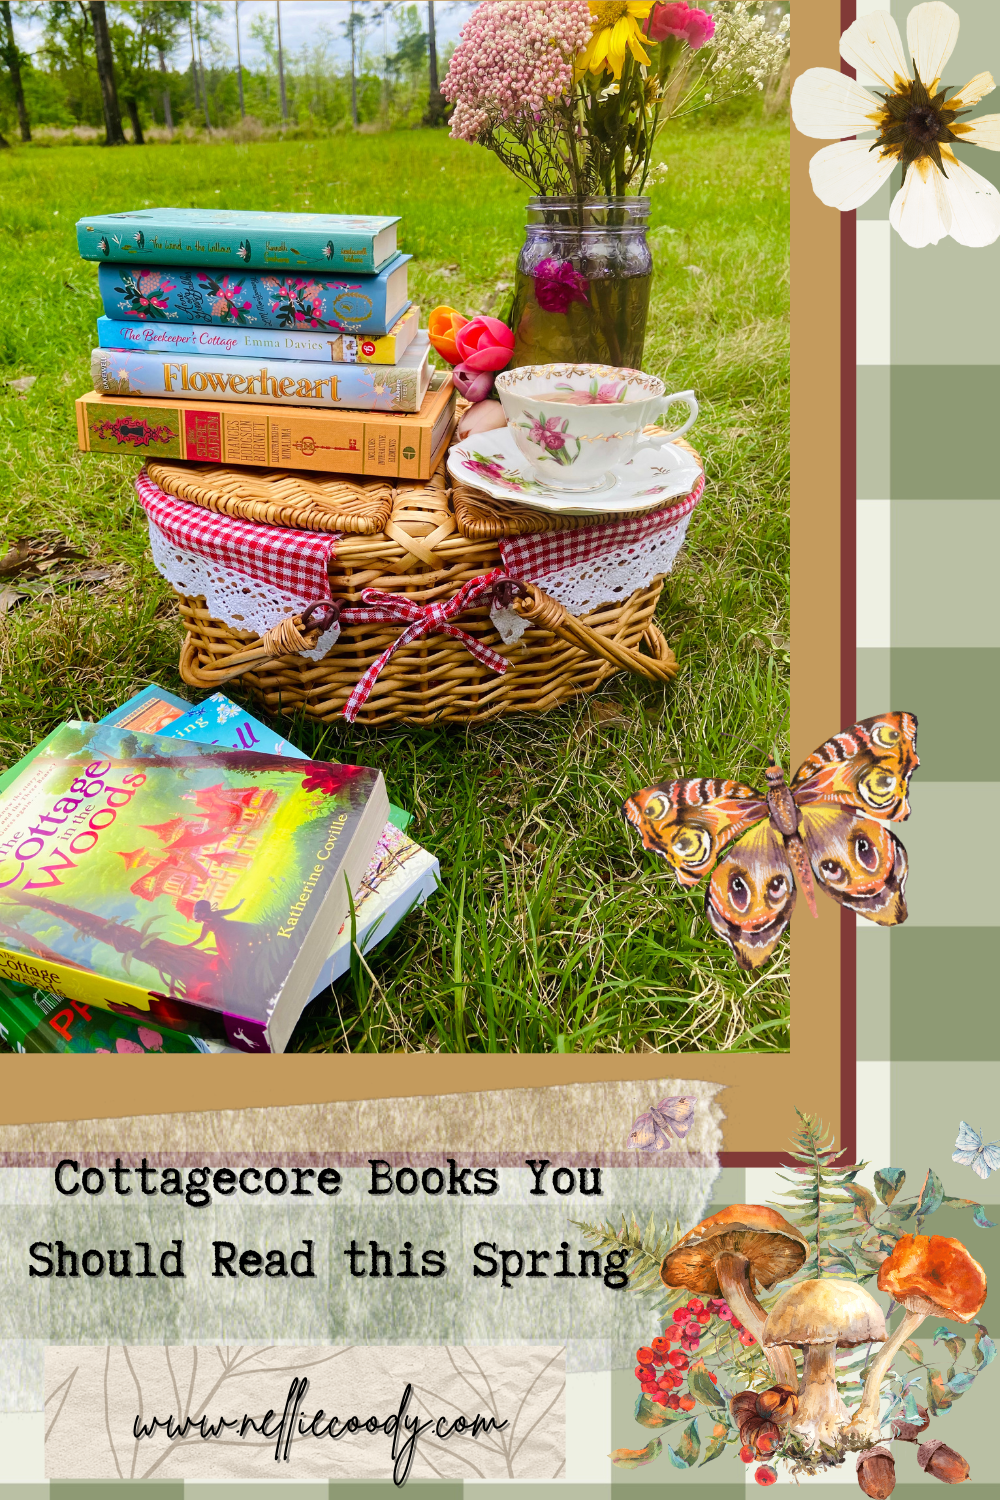 Cottagecore Books You Should Read this Spring